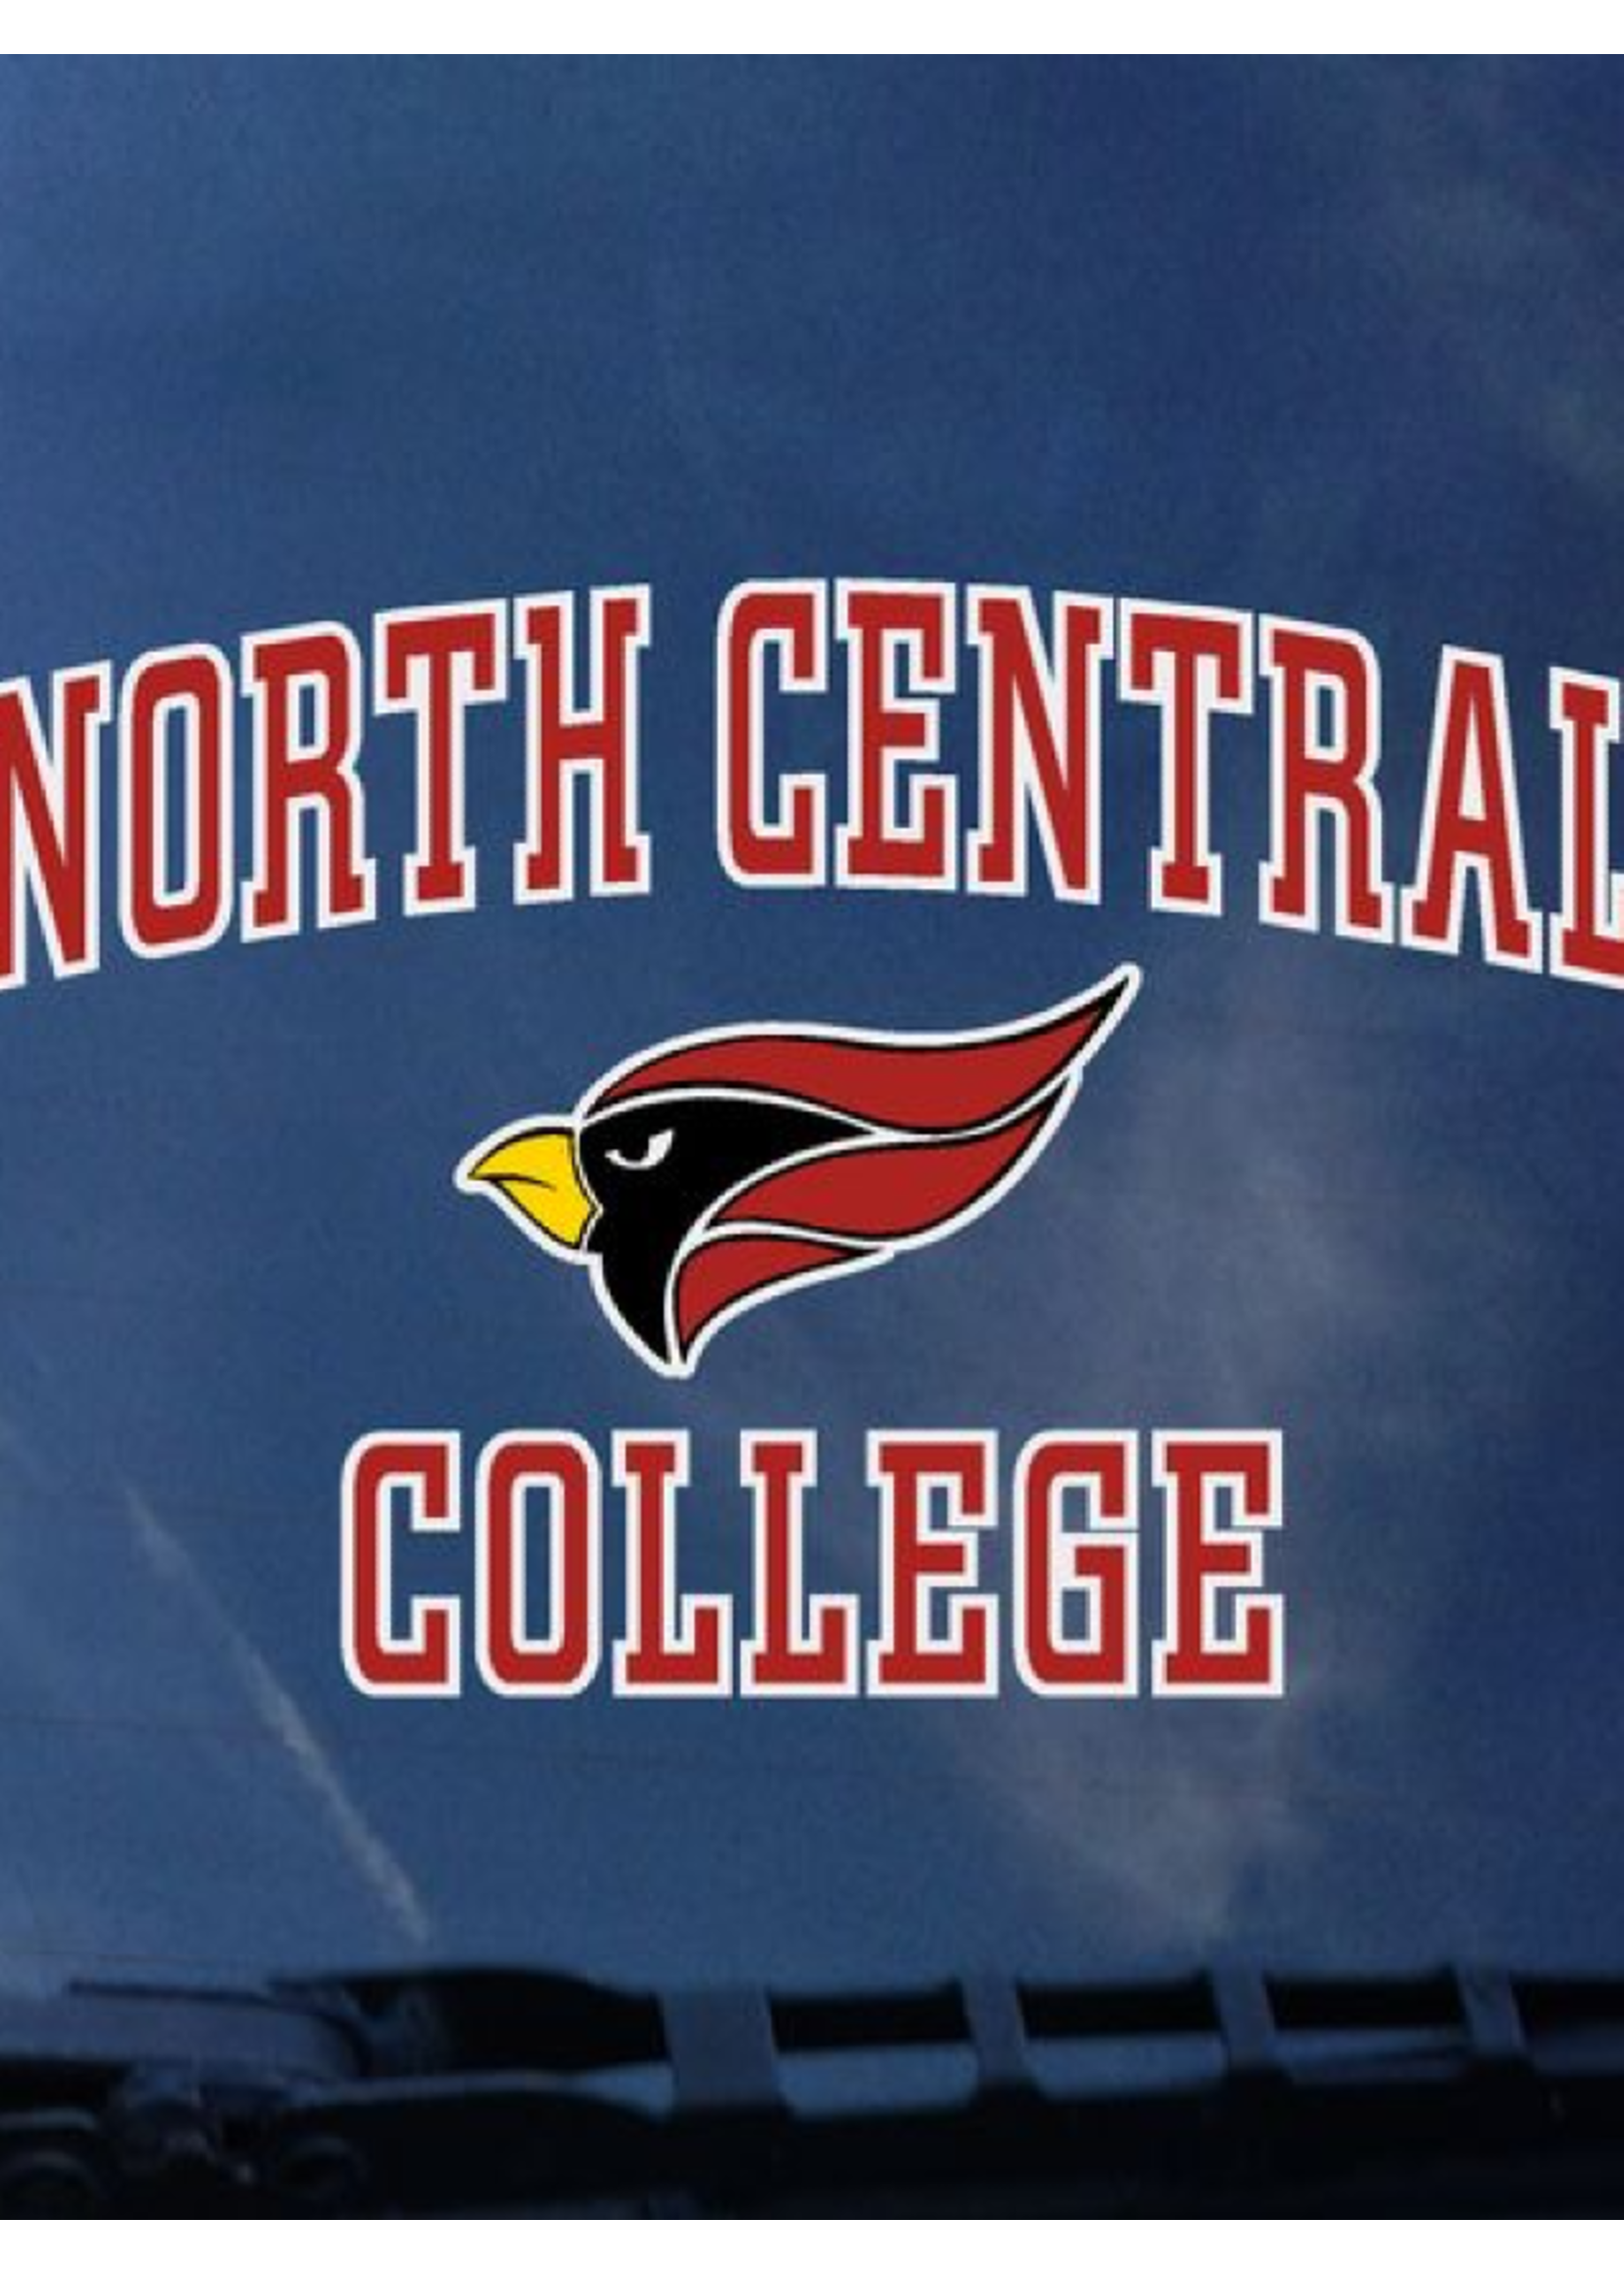 CDI Corporation North Central College Decal w/ Cardinal Head by ColorShock